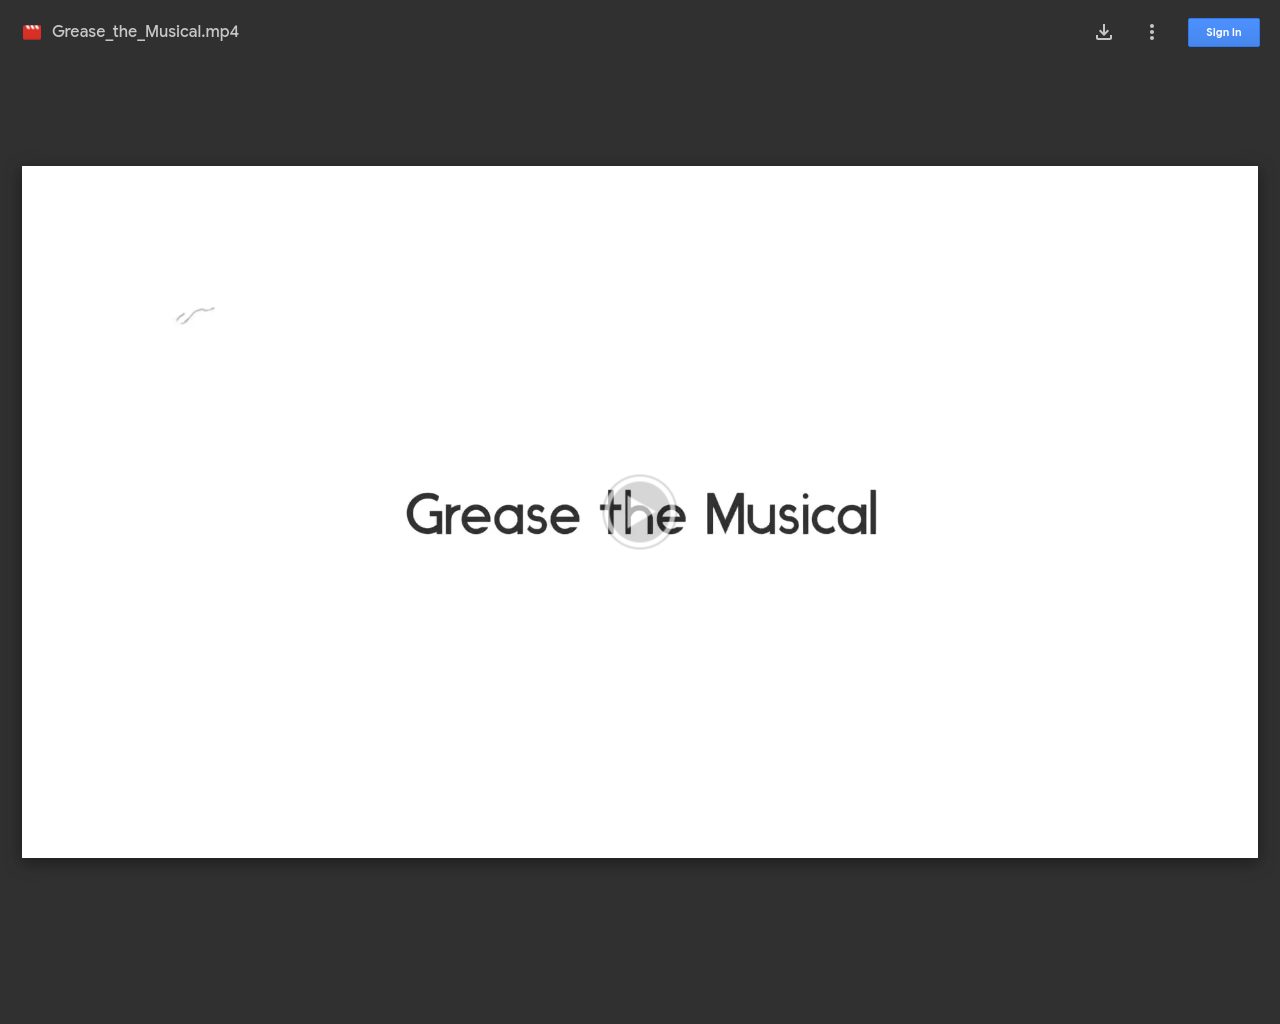 ‘Grease The Musical' by Grad Class 